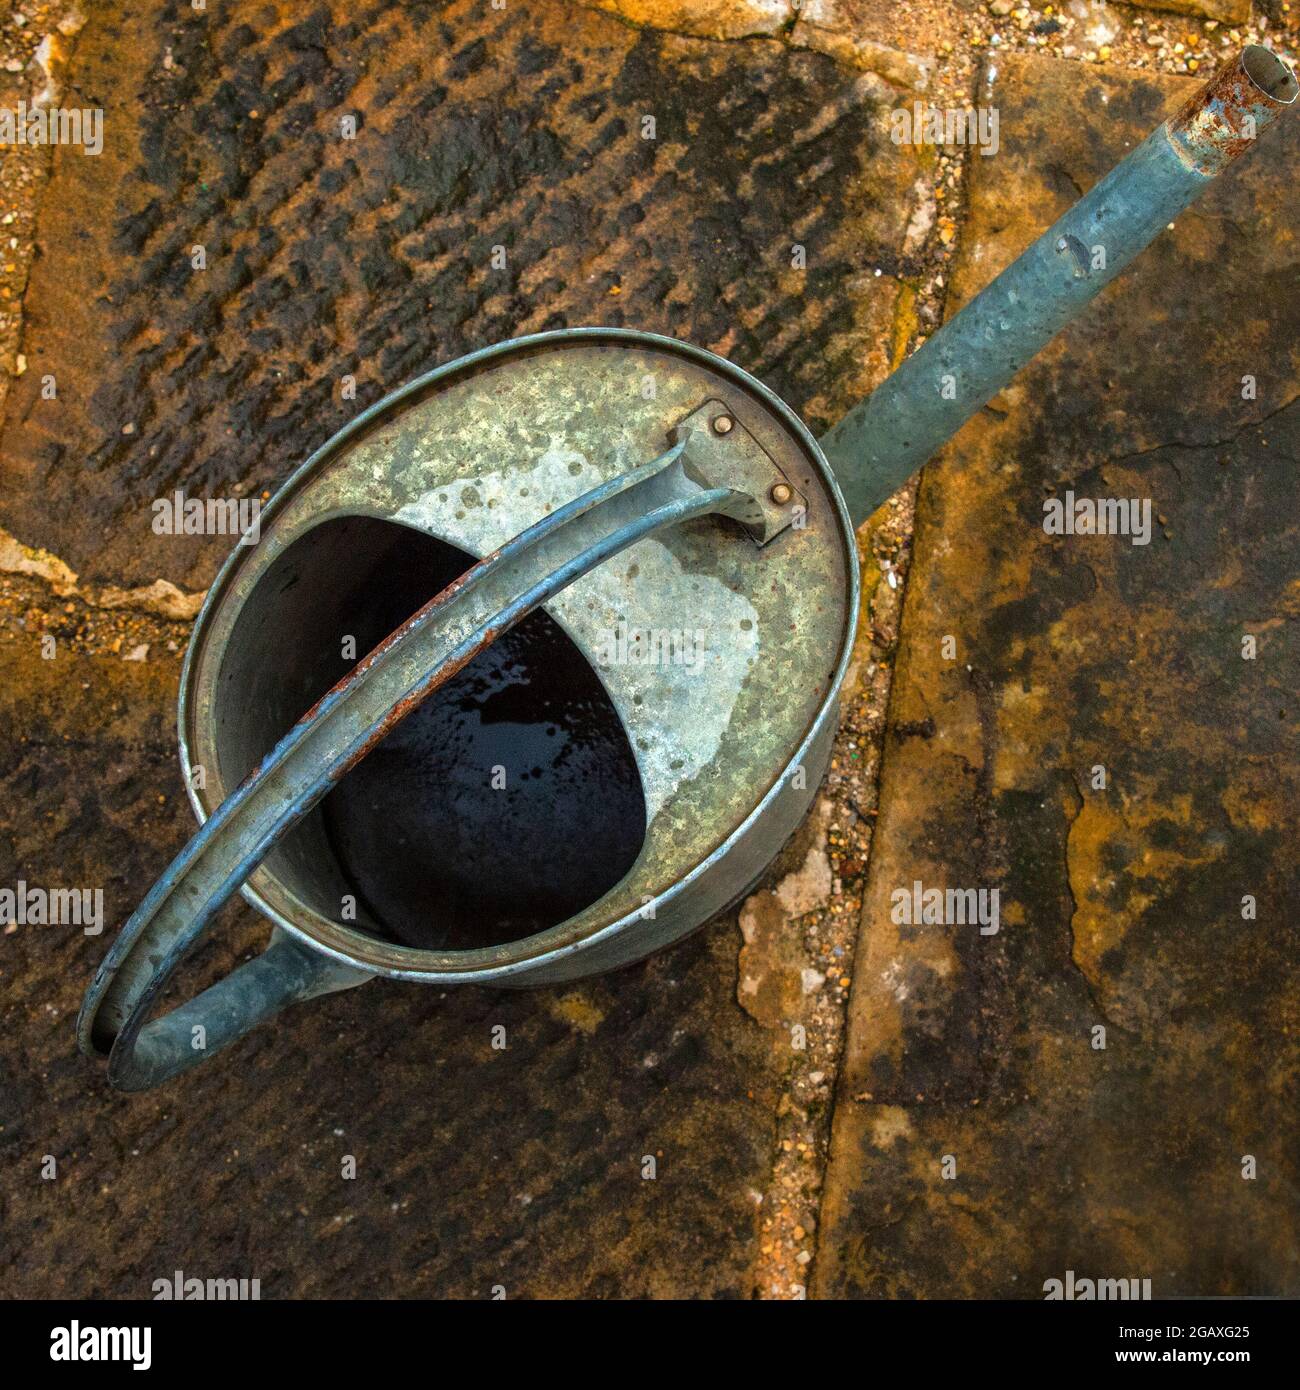 Old Watering Can, viewed from above Stock Photo